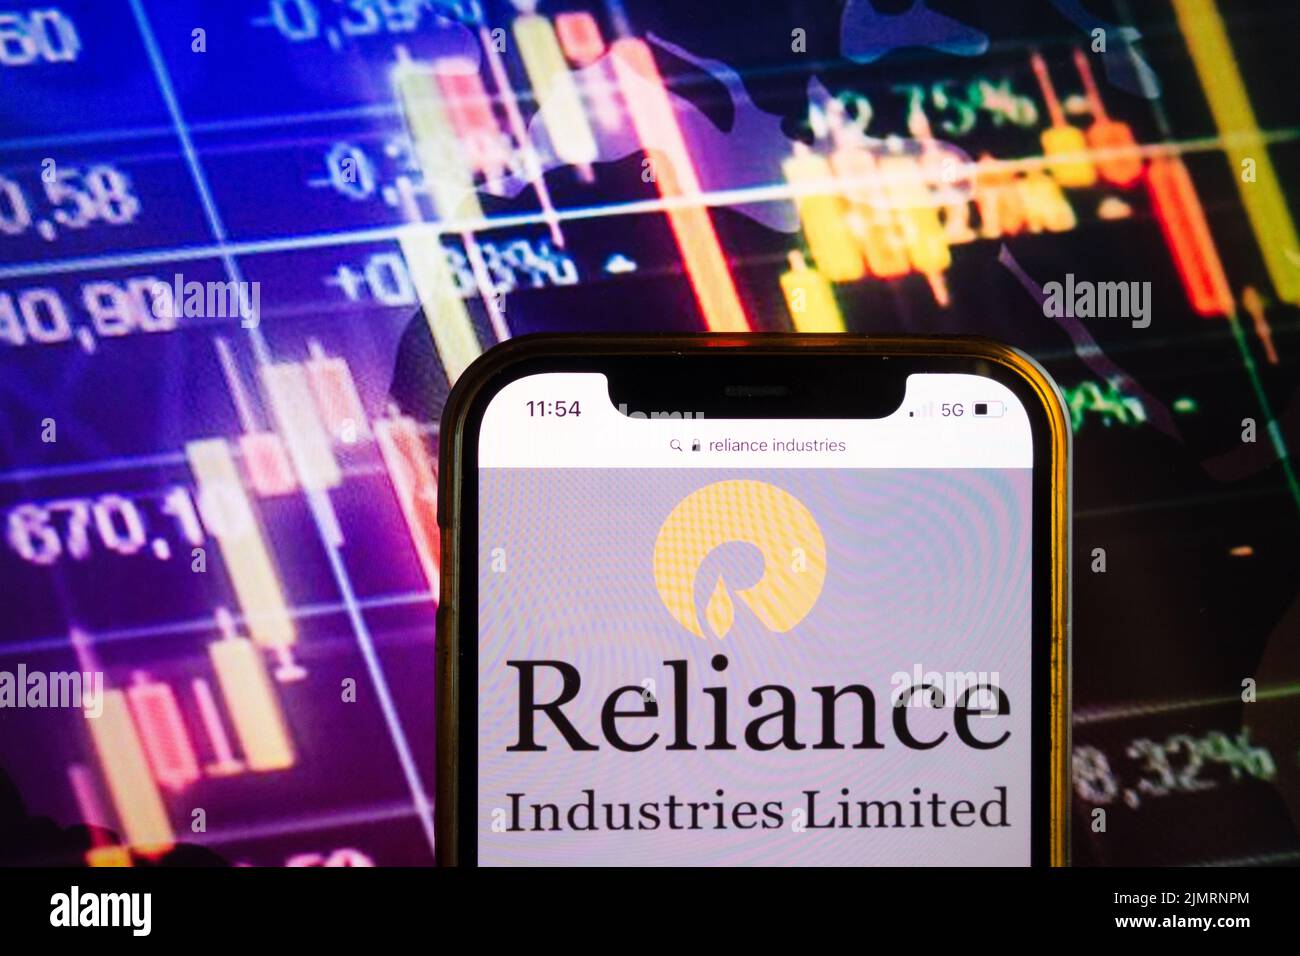 KONSKIE, POLAND - August 07, 2022: Smartphone displaying logo of Reliance Industries Limited on stock exchange diagram background Stock Photo